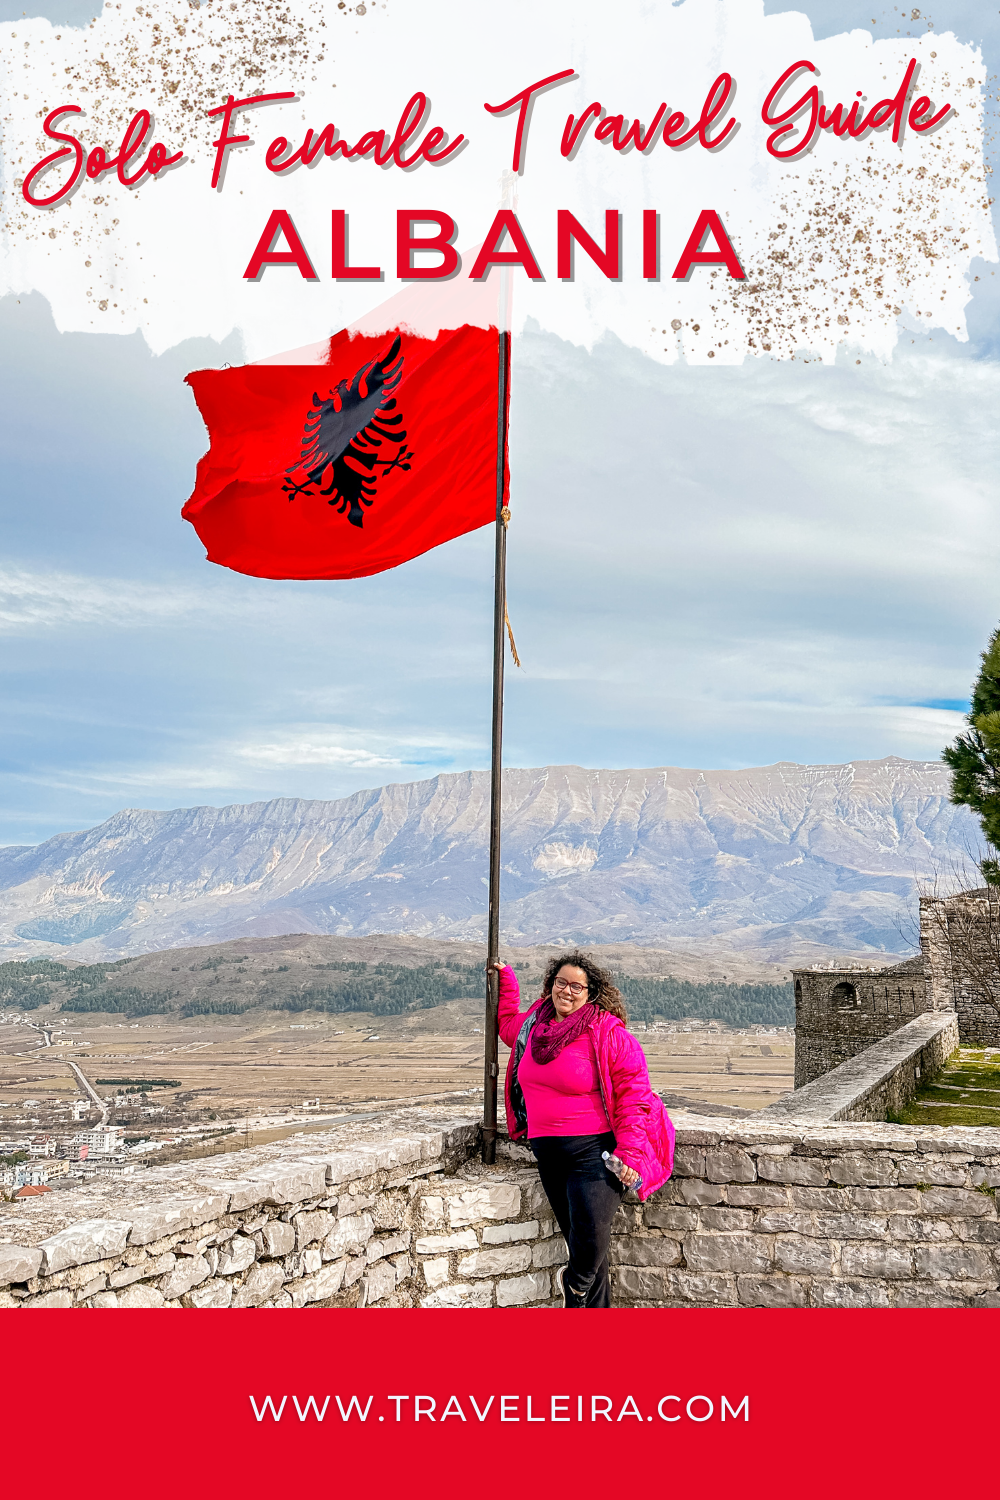 Is Albania safe for solo female travelers? This Albania Solo Female Travel Guide will give you all the safety tips for traveling solo in Albania.